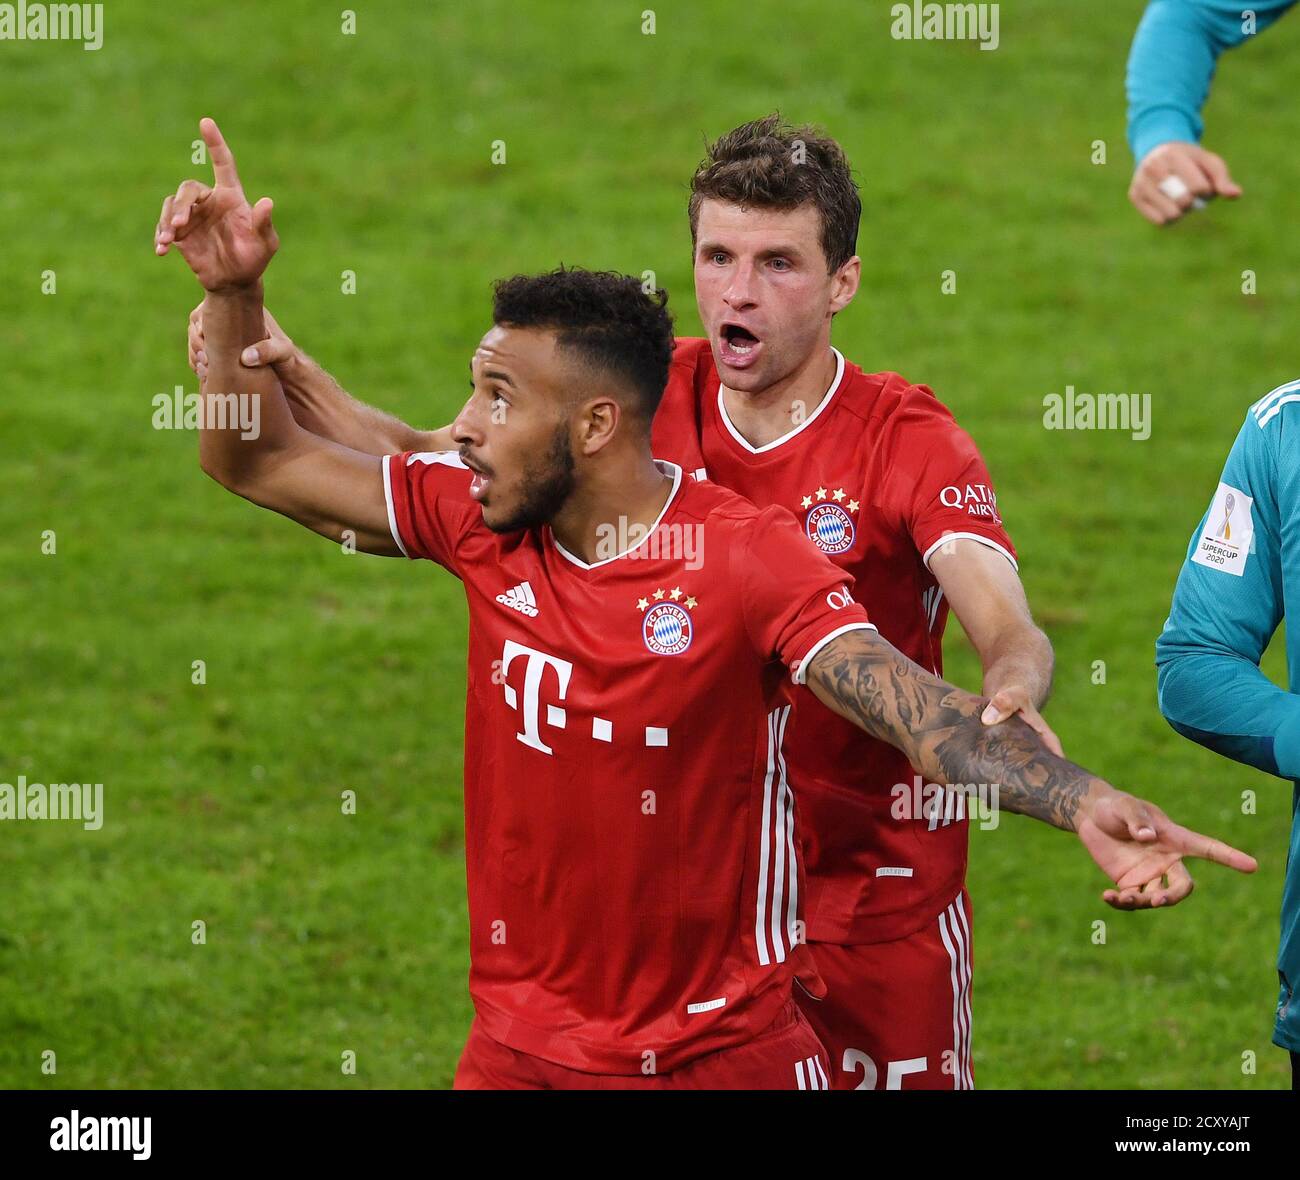 Allianz Arena Munich Germany 30.09.20, Football: German SUPERCUP FINALE 2020/2021, FC Bayern Muenchen (FCB, red) vs Borussia Dortmund  (BVB, yellow) 3:2 — Thomas Mueller (right) celebrates with Corentin Tolisso (both FCB)  Foto: Markus Ulmer/Pressefoto Ulmer/Pool/via Kolvenbach  DFL regulations prohibit any use of photographs as image sequences and/or quasi-video. Stock Photo